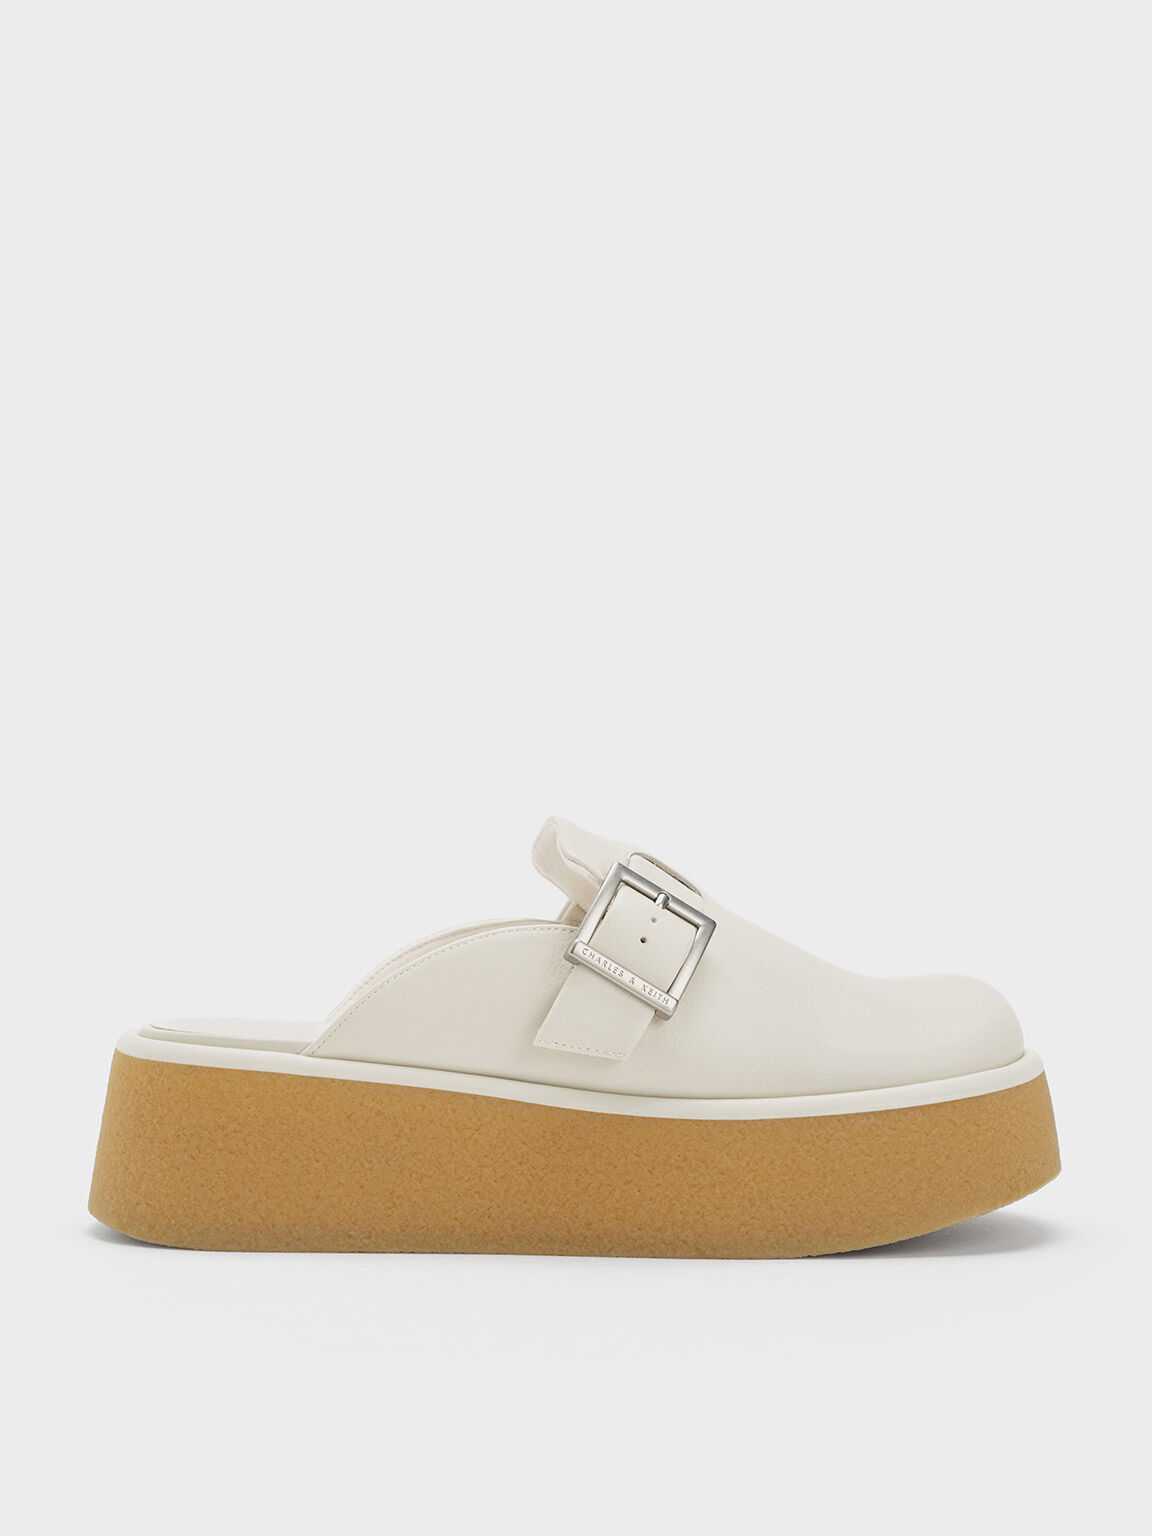 Women's Wedges | Shop Exclusives Styles | CHARLES & KEITH International